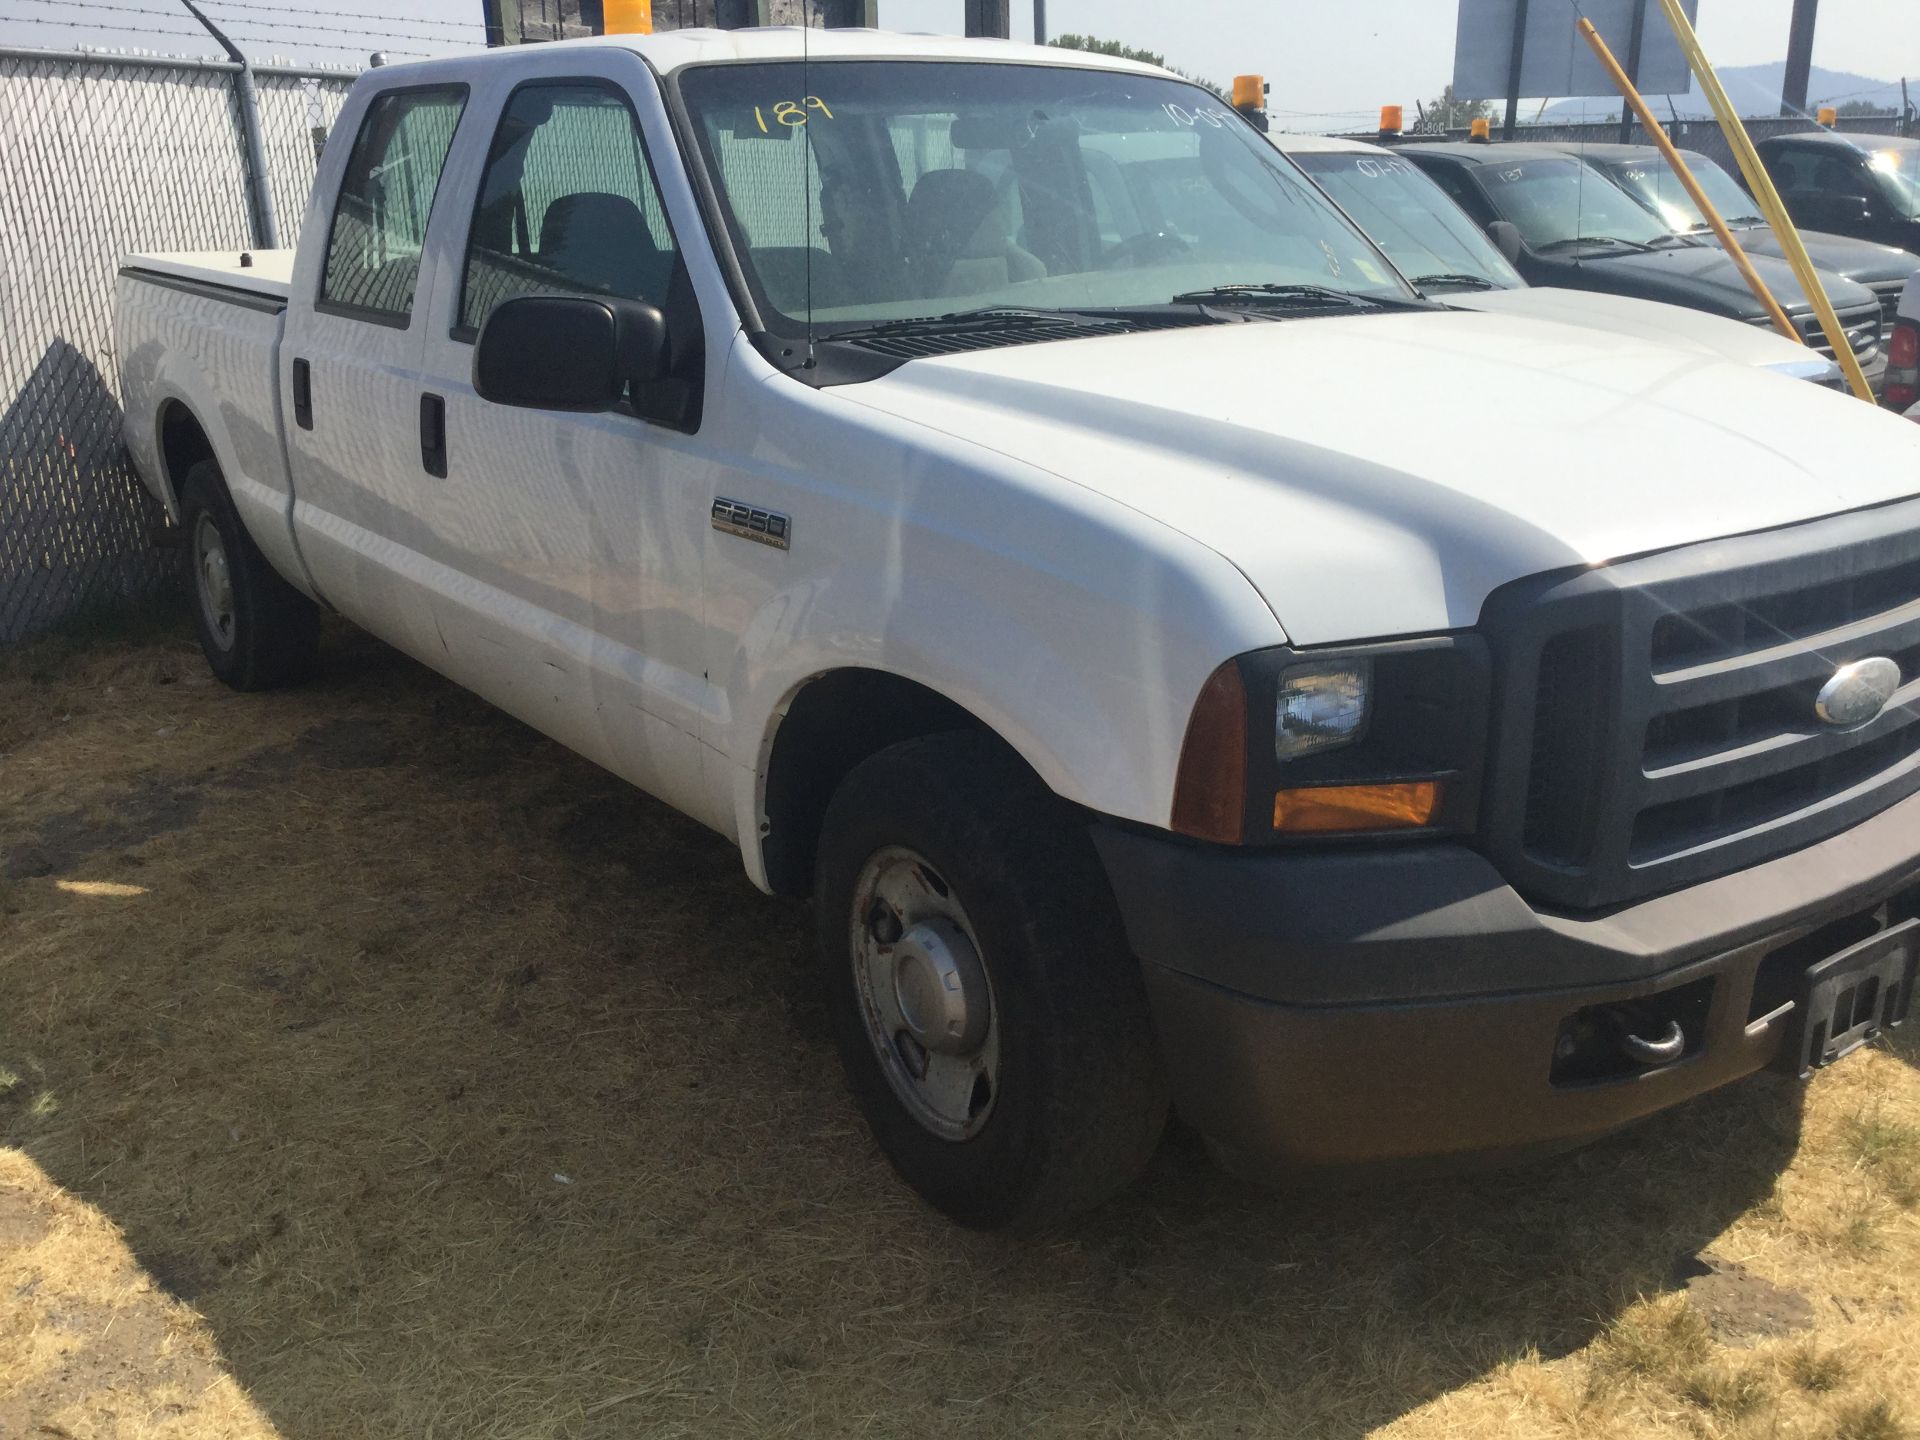 Year: 2006 Make: Ford Model: 3/4T Type: Pickup-Crew Cab Vin#: C68151 Mileage/Hours: 279640 5.4L, - Image 4 of 4